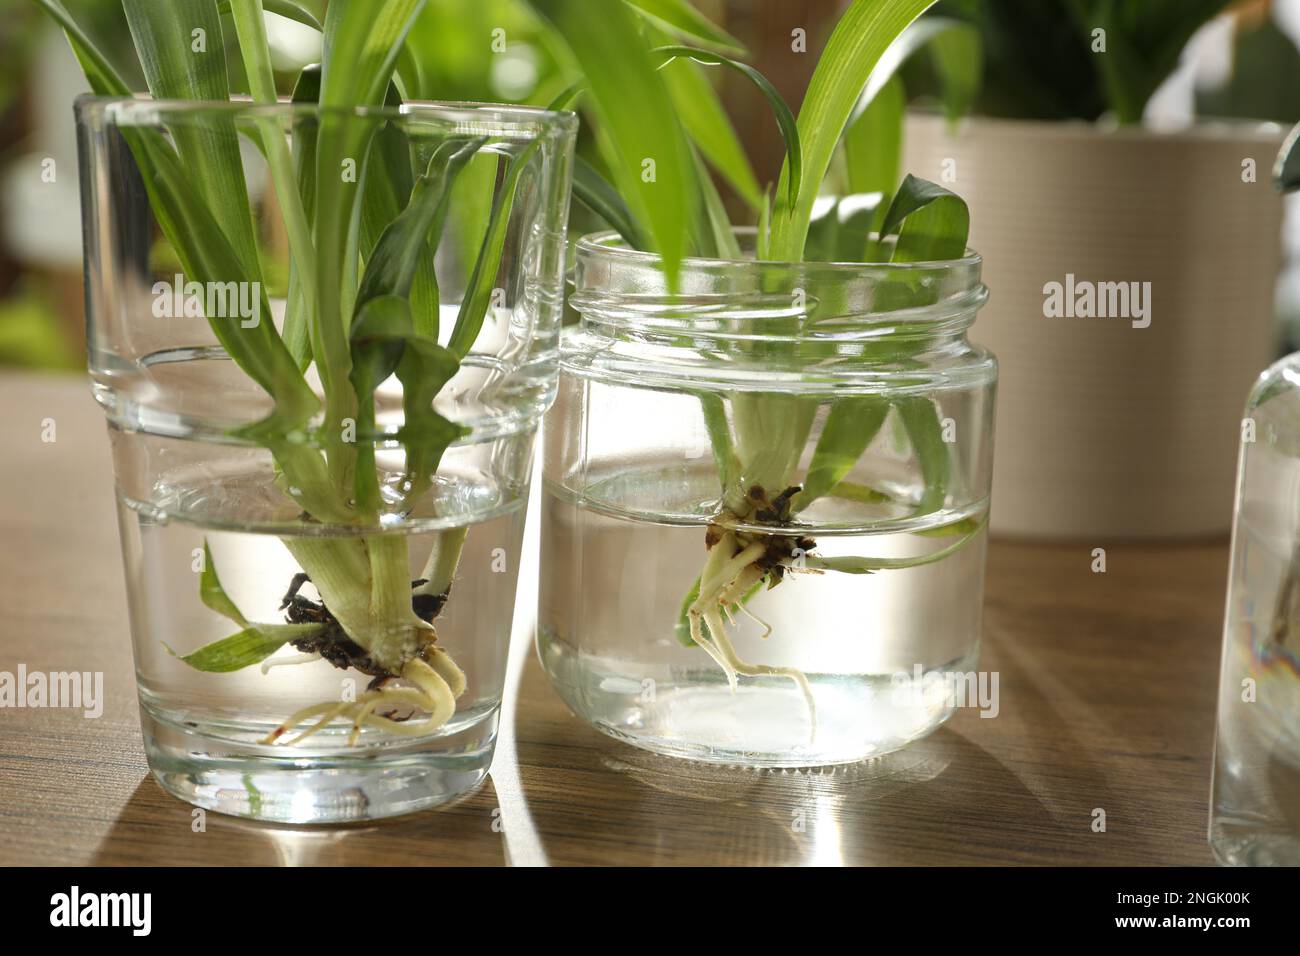 Exotic house plants in water on wooden table, closeup Stock Photo